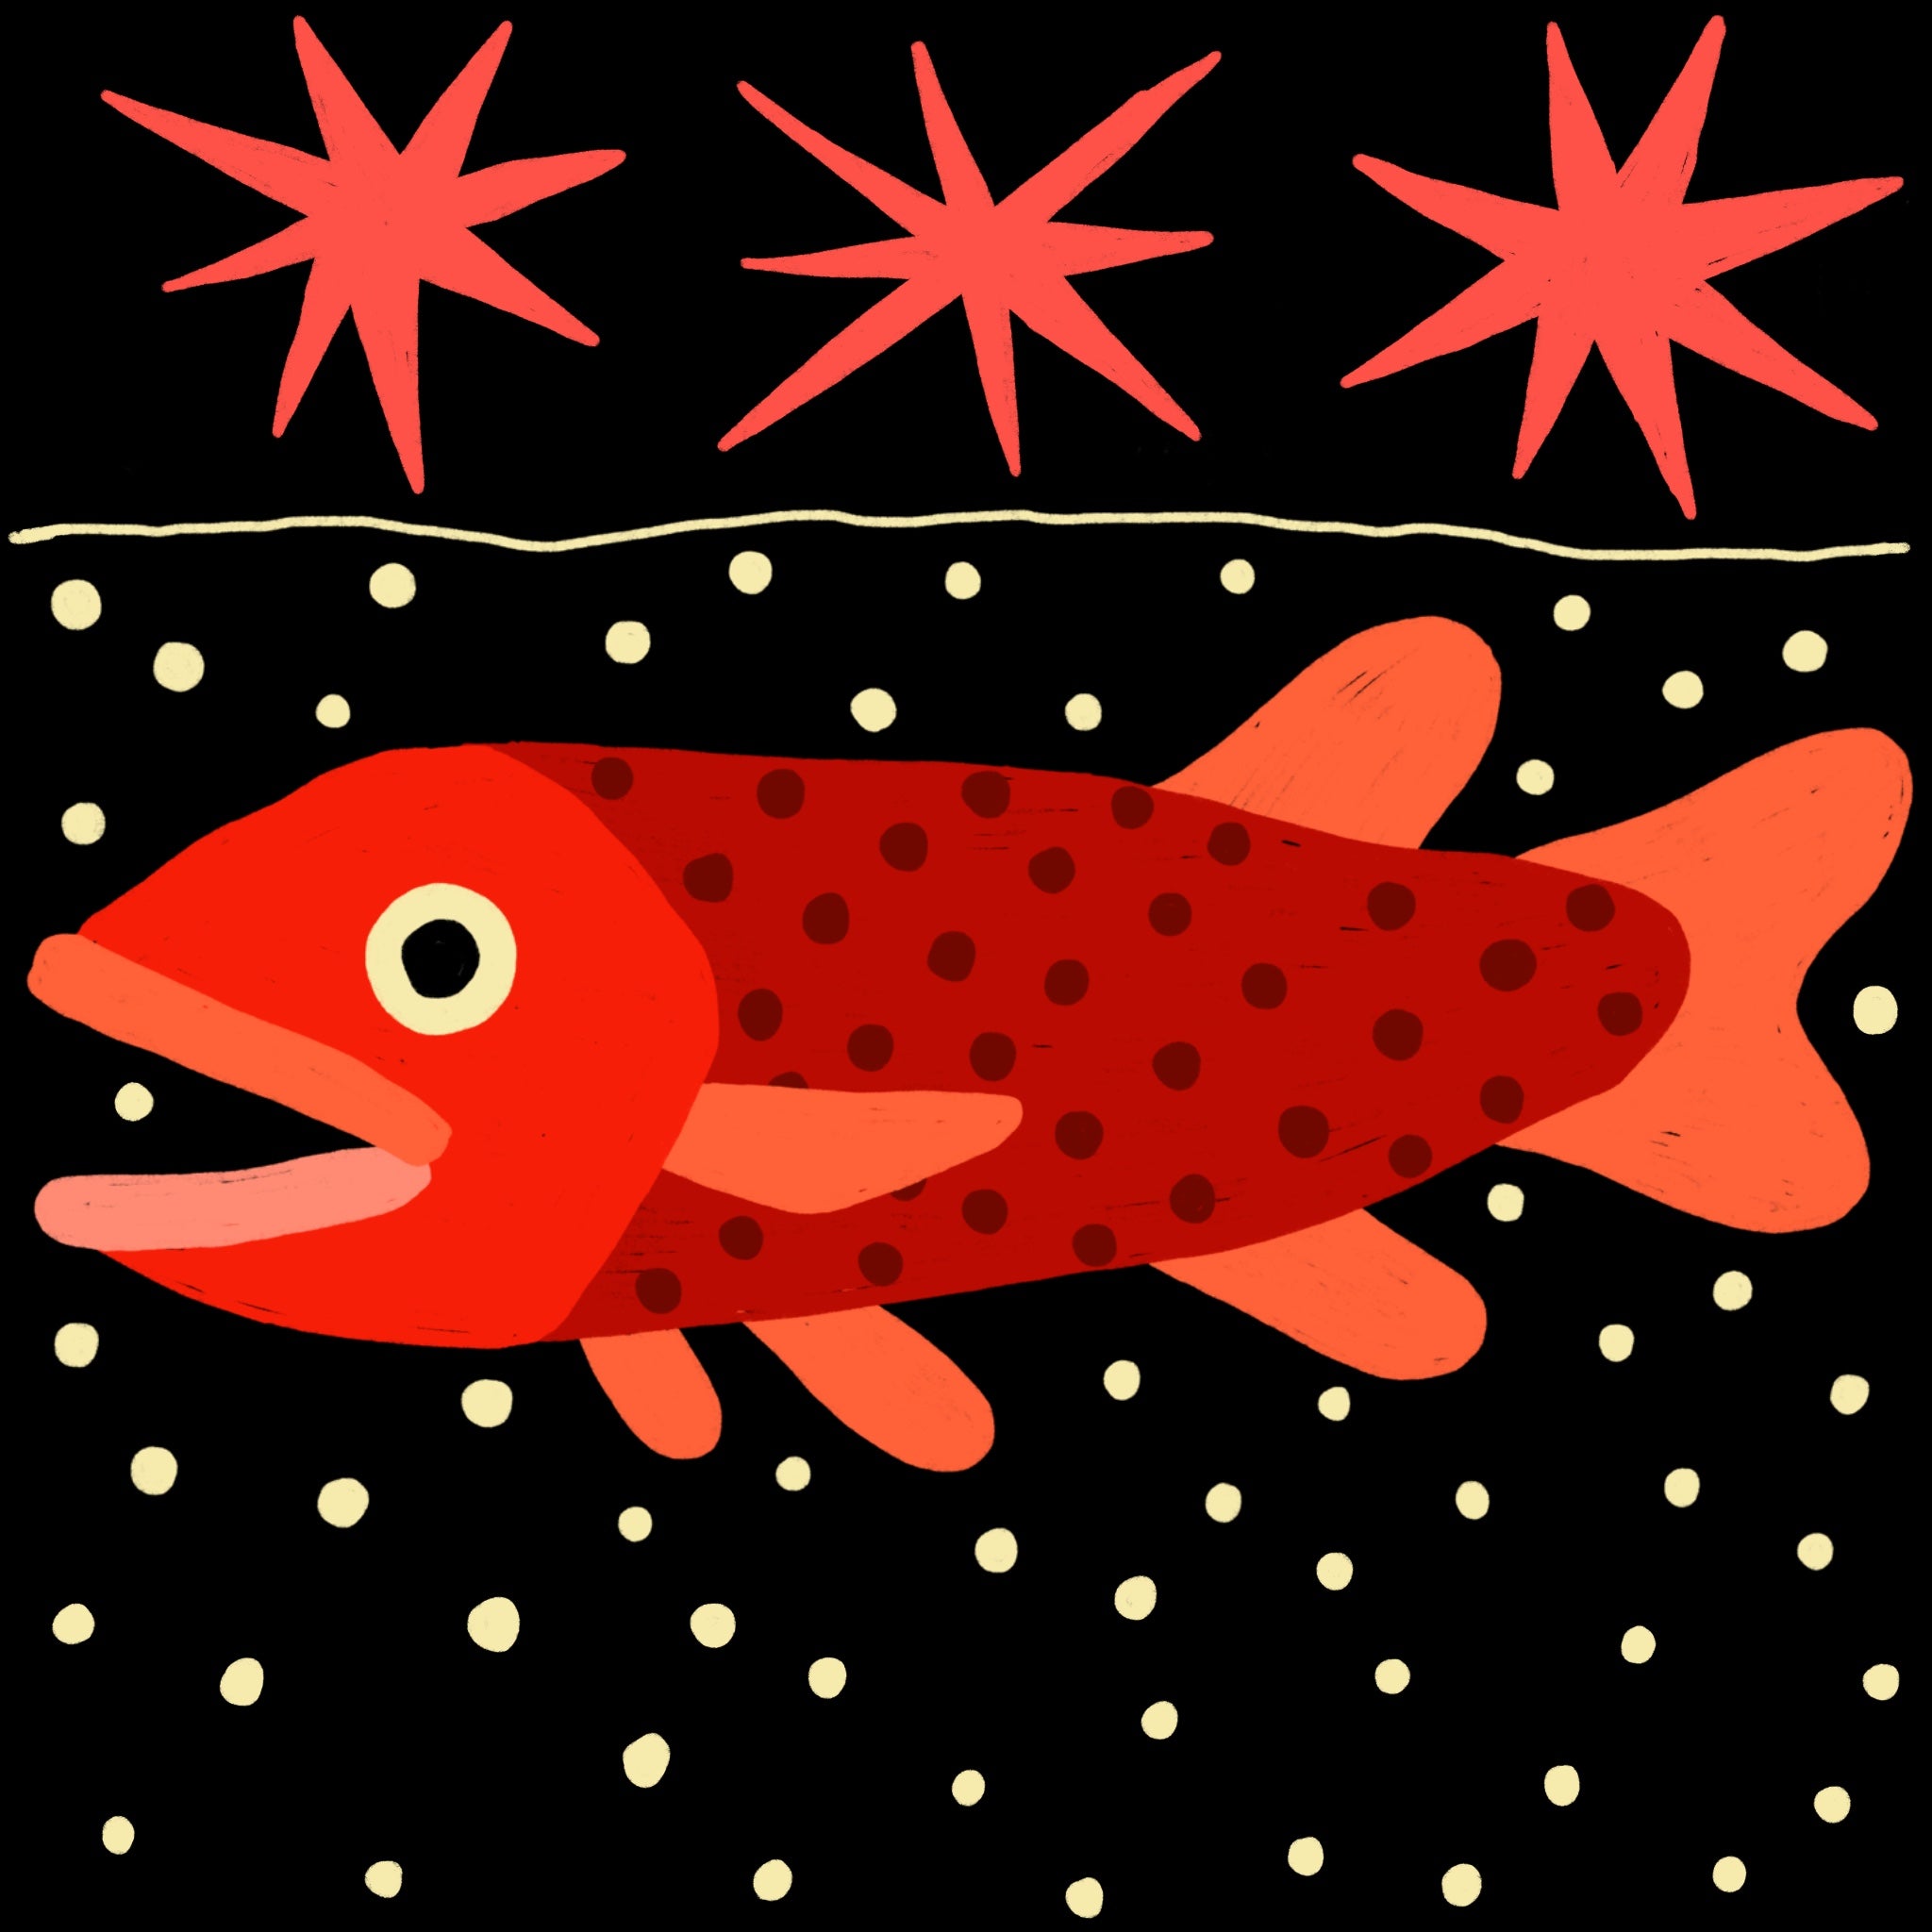 Illustration of a fish by Tom O'Hern